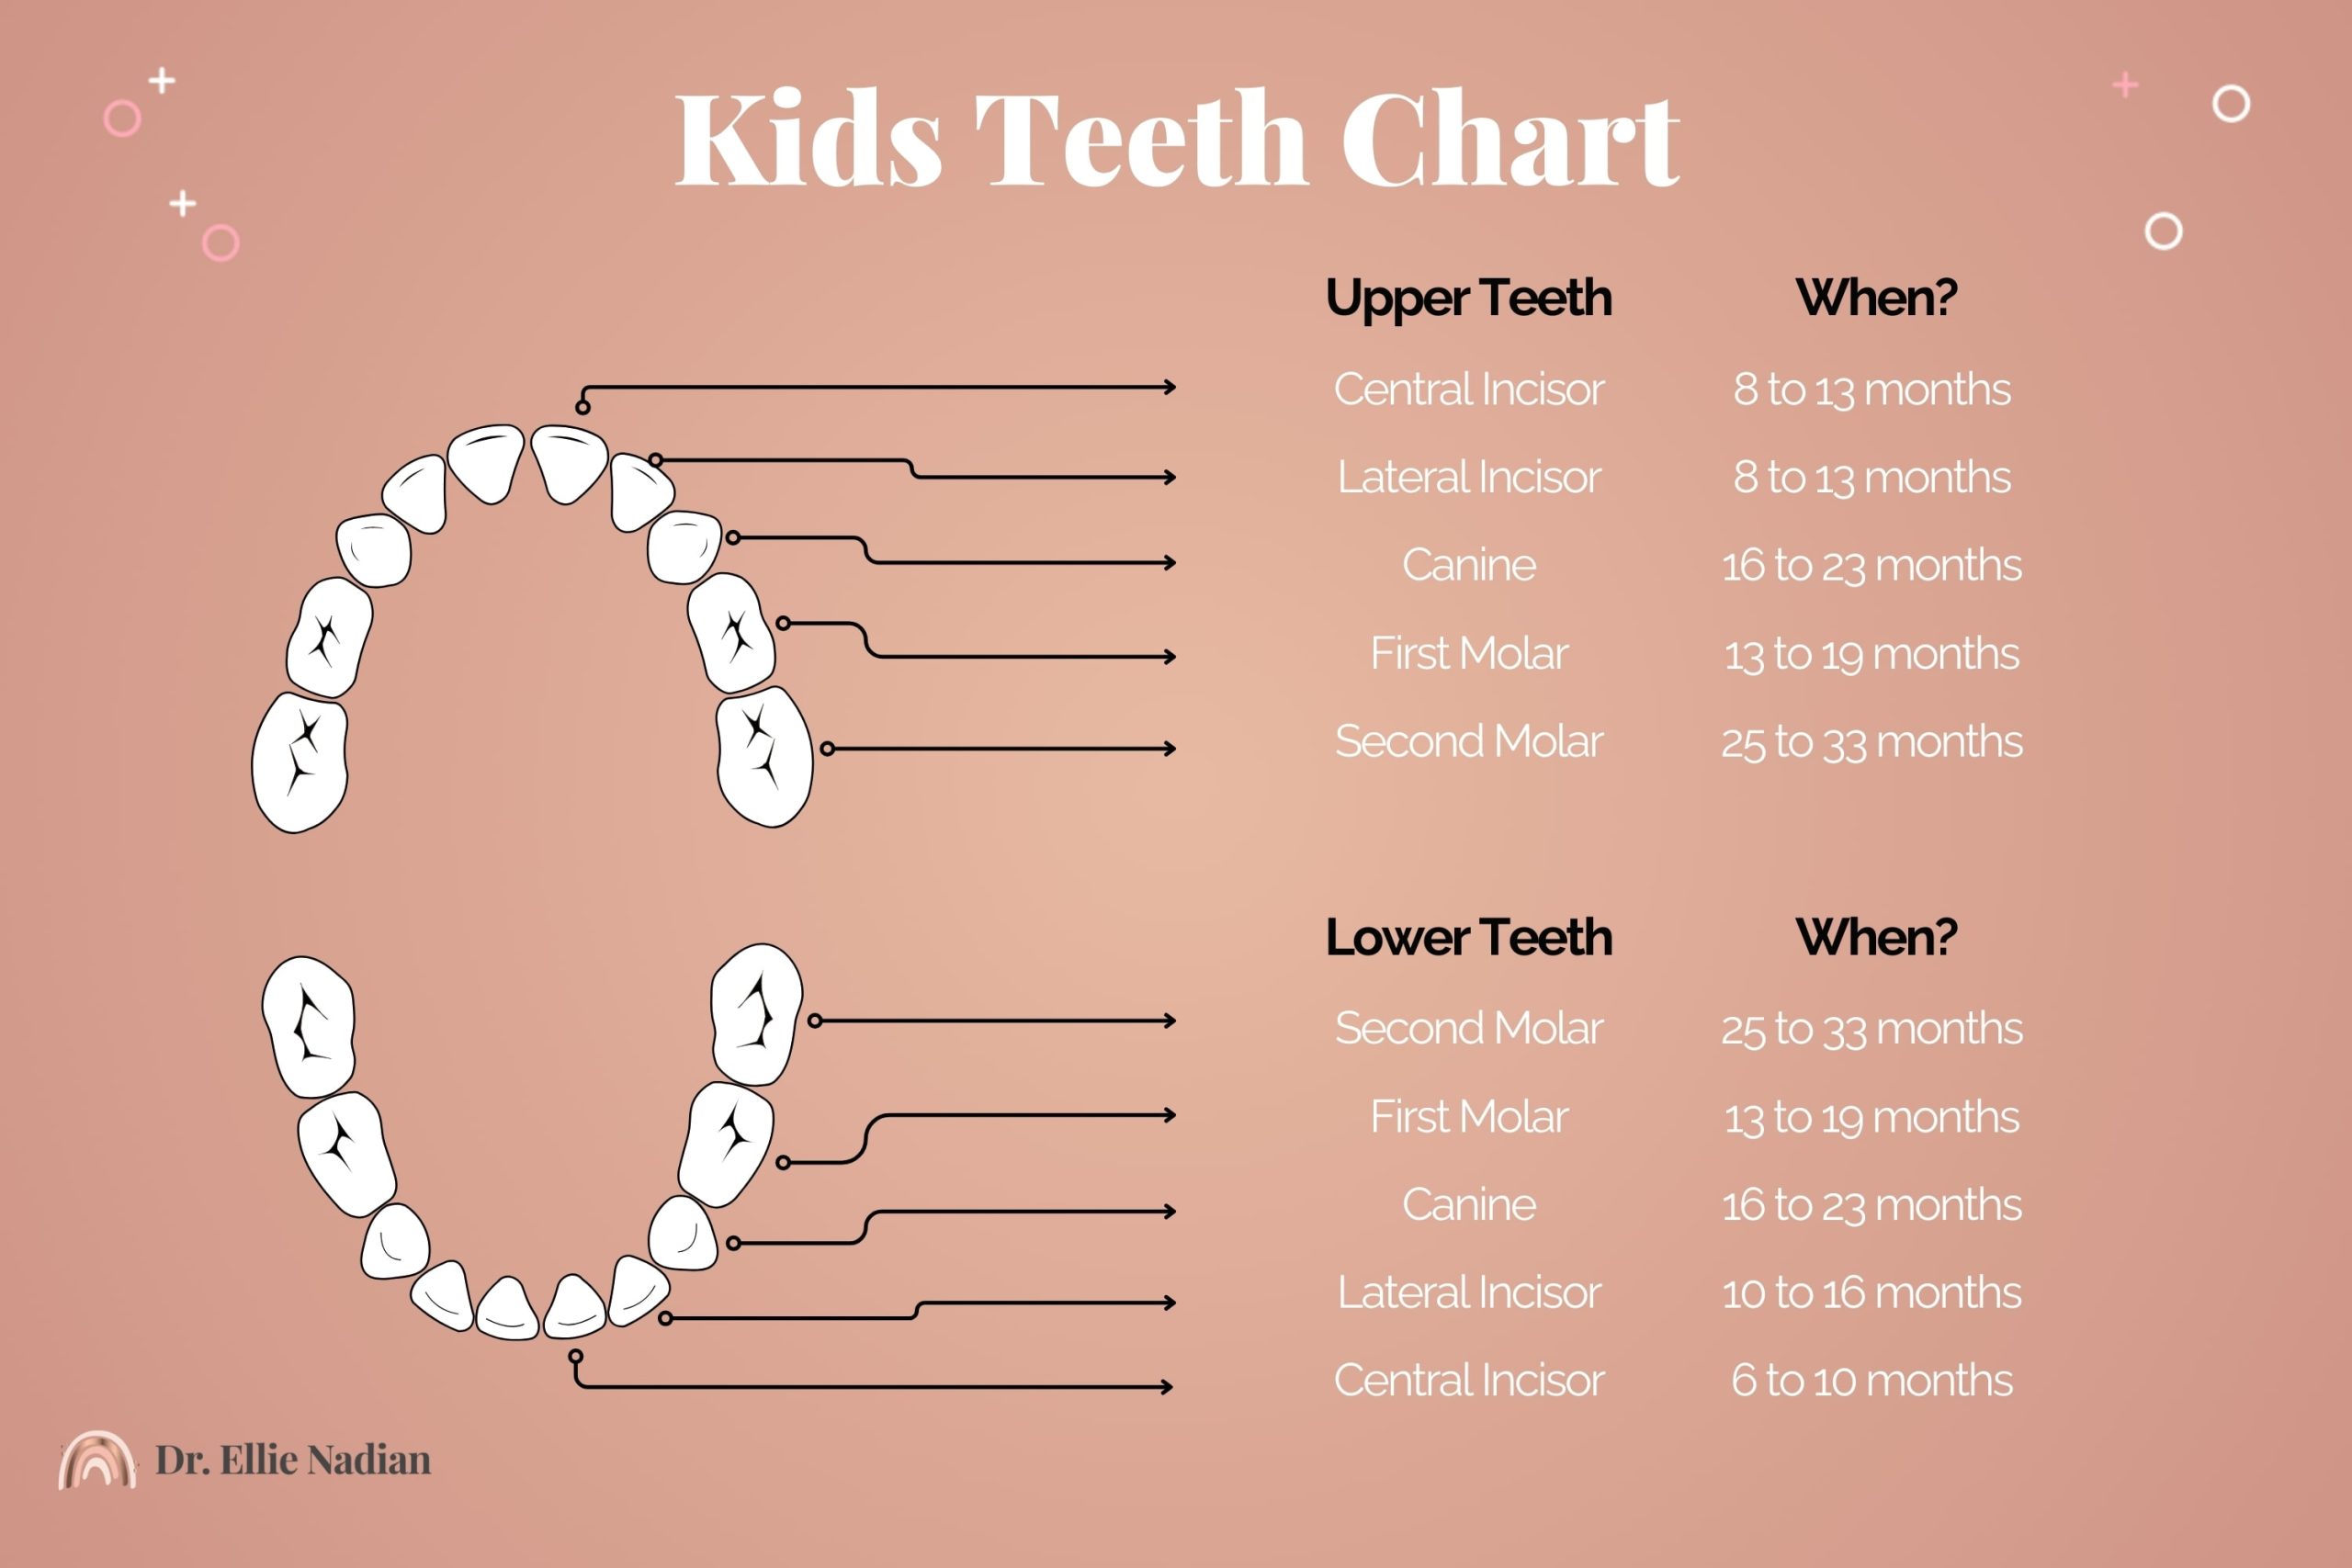 Kids Teeth Chart -Timeline of the Growth and Development of Childrens Teeth